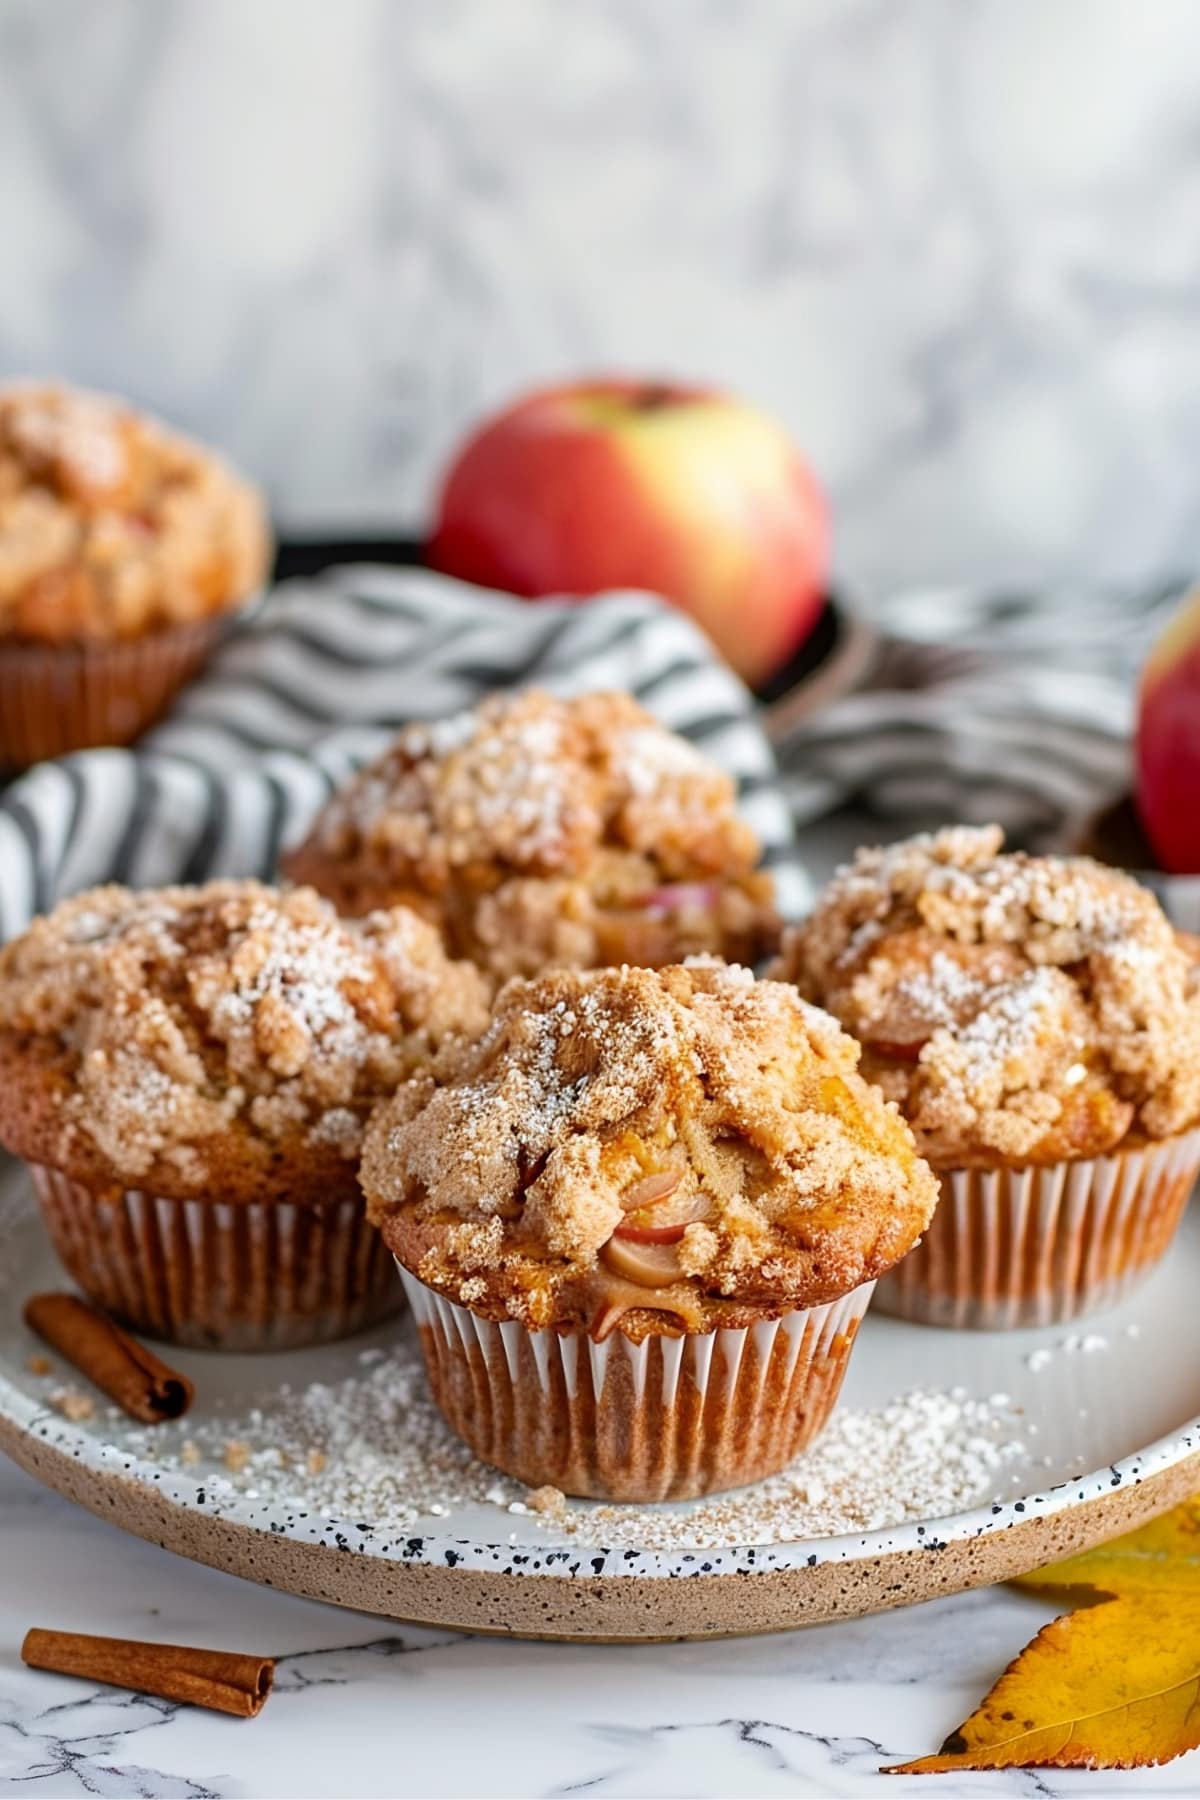 Deliciously moist and fluffy apple cinnamon muffins